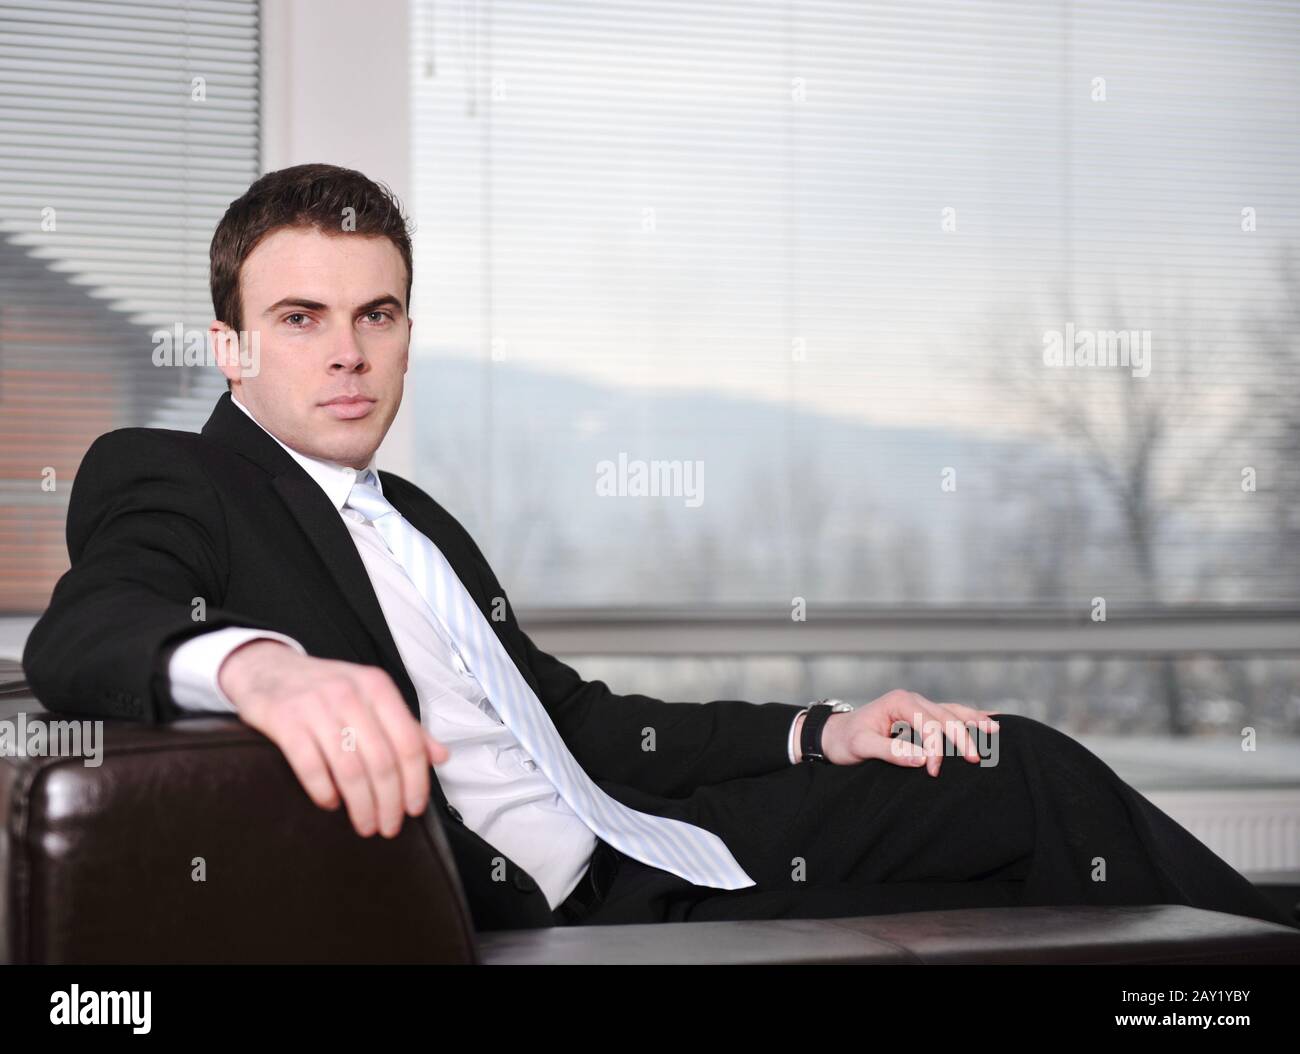 Businessman sitting on leather sofa in office Stock Photo